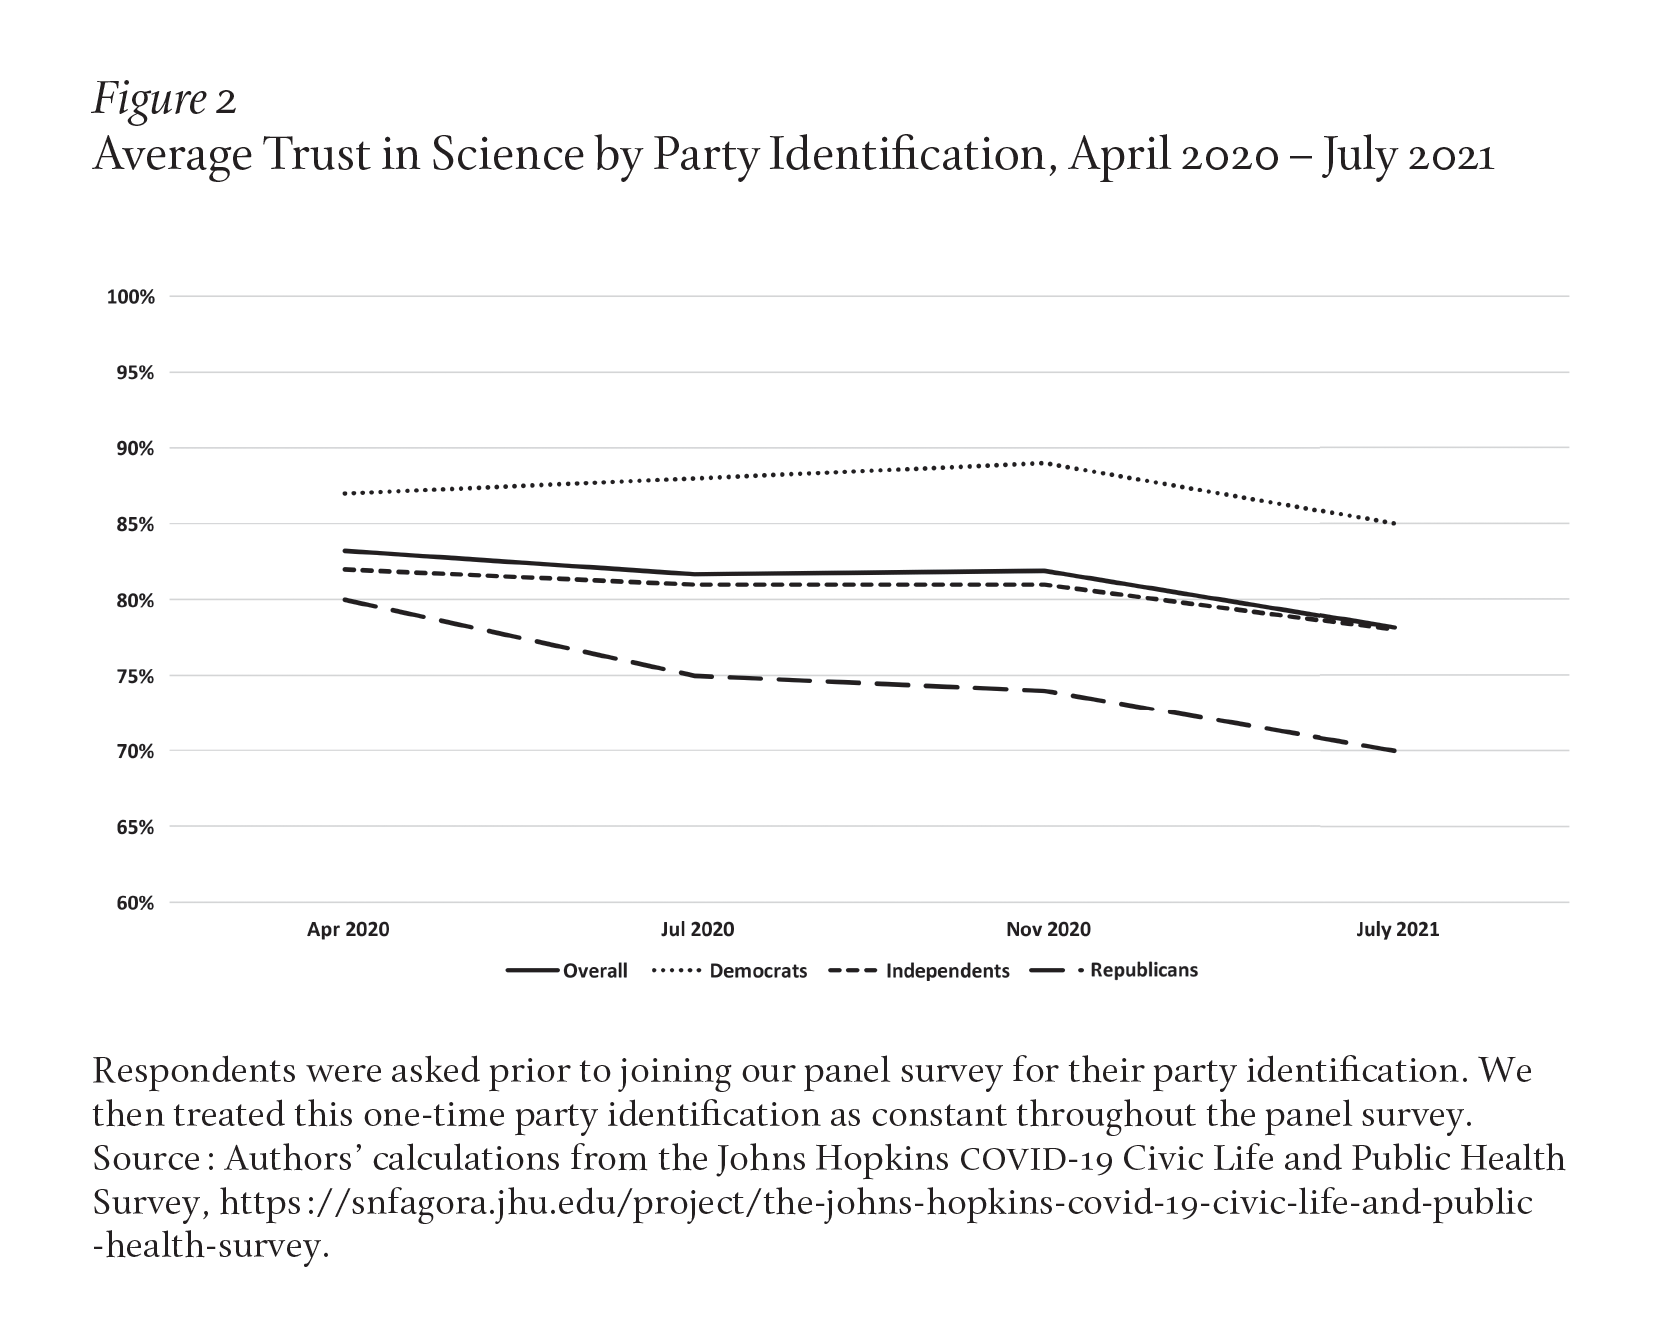 Image description: A line graph shows rates of trust in science according to partisan affiliation, April 2020-July 2021. Democrats' trust ranged 85-89%. Republican's trust began at 80%, then fell to 70% by the end of the study. Unaffiliated voters hovered near the average rate, 82% in April 2020, 77% in July 2021. Caption: Respondents were asked prior to joining our panel survey for their party identification. Source: Authors’ calculations from the Johns Hopkins COVID-19 Civic Life and Public Health Survey.